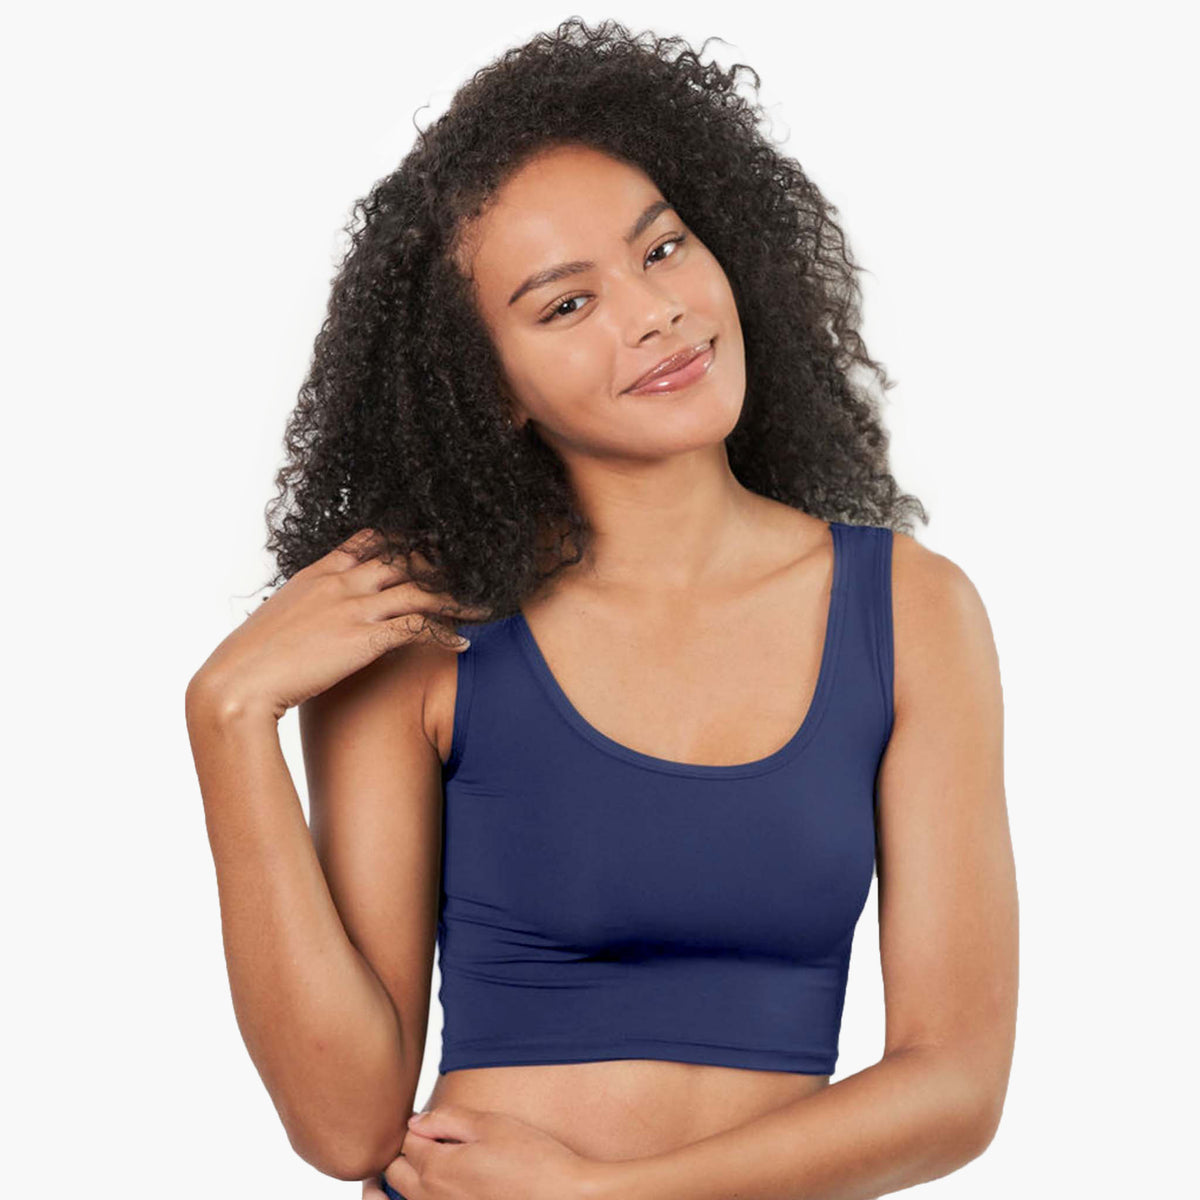 ✨discount: BUMBLEBABY10 ✨ The @larken_shop Larken X bra is next level when  it comes to hands free nursing and pumping bras! If you a